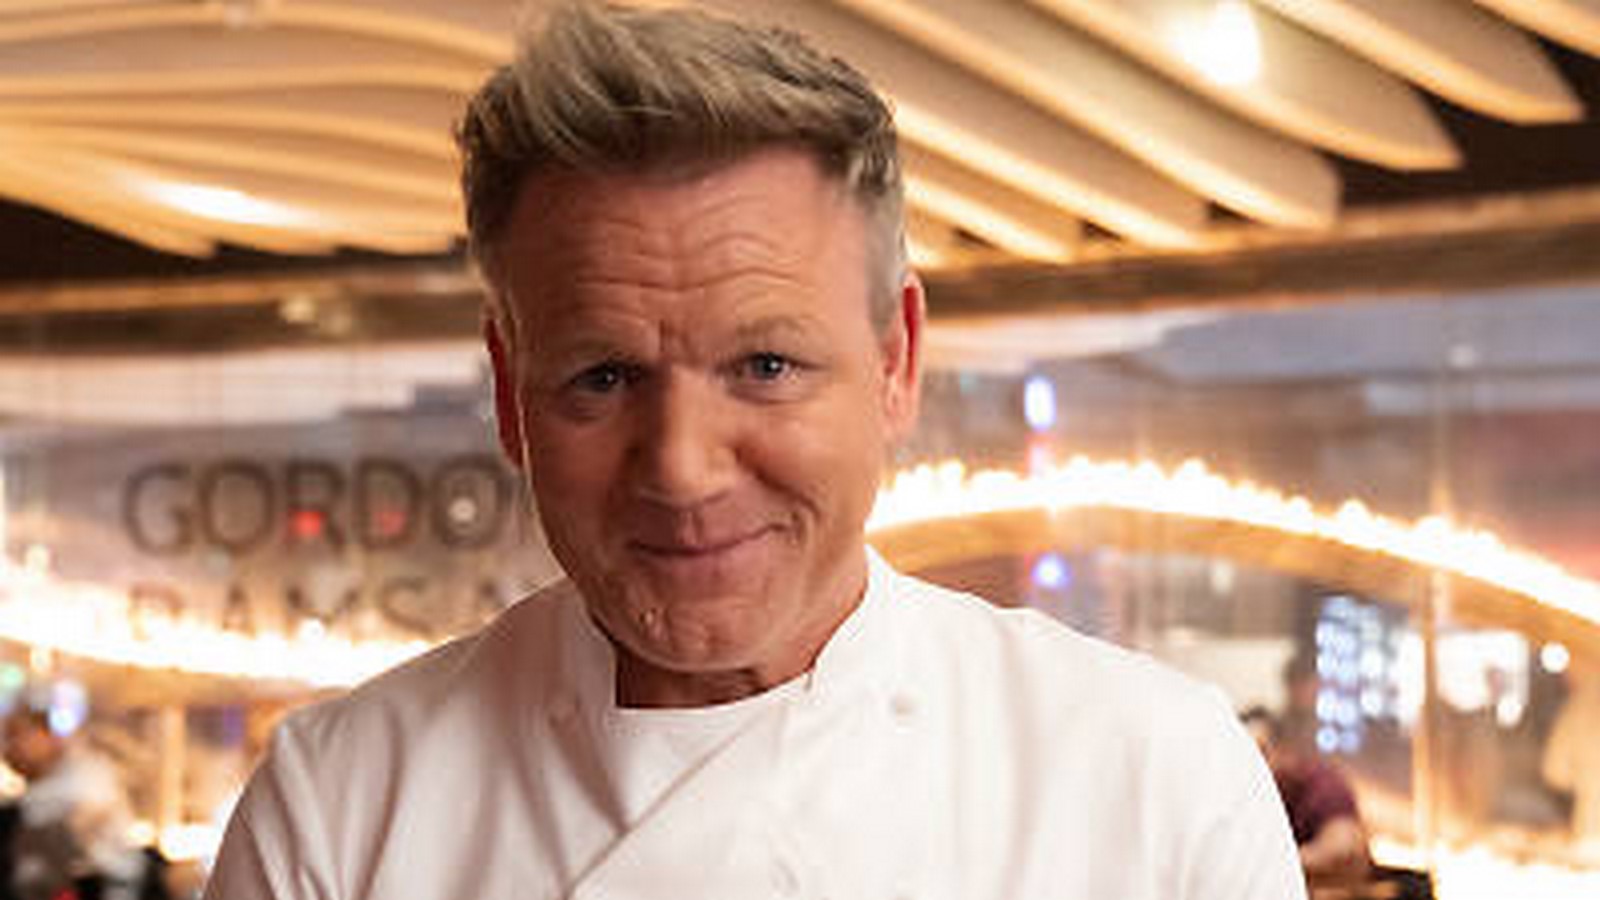 An inside look at all the houses owned by Gordon Ramsay An inside look at all the houses owned by Gordon Ramsay - Sheet